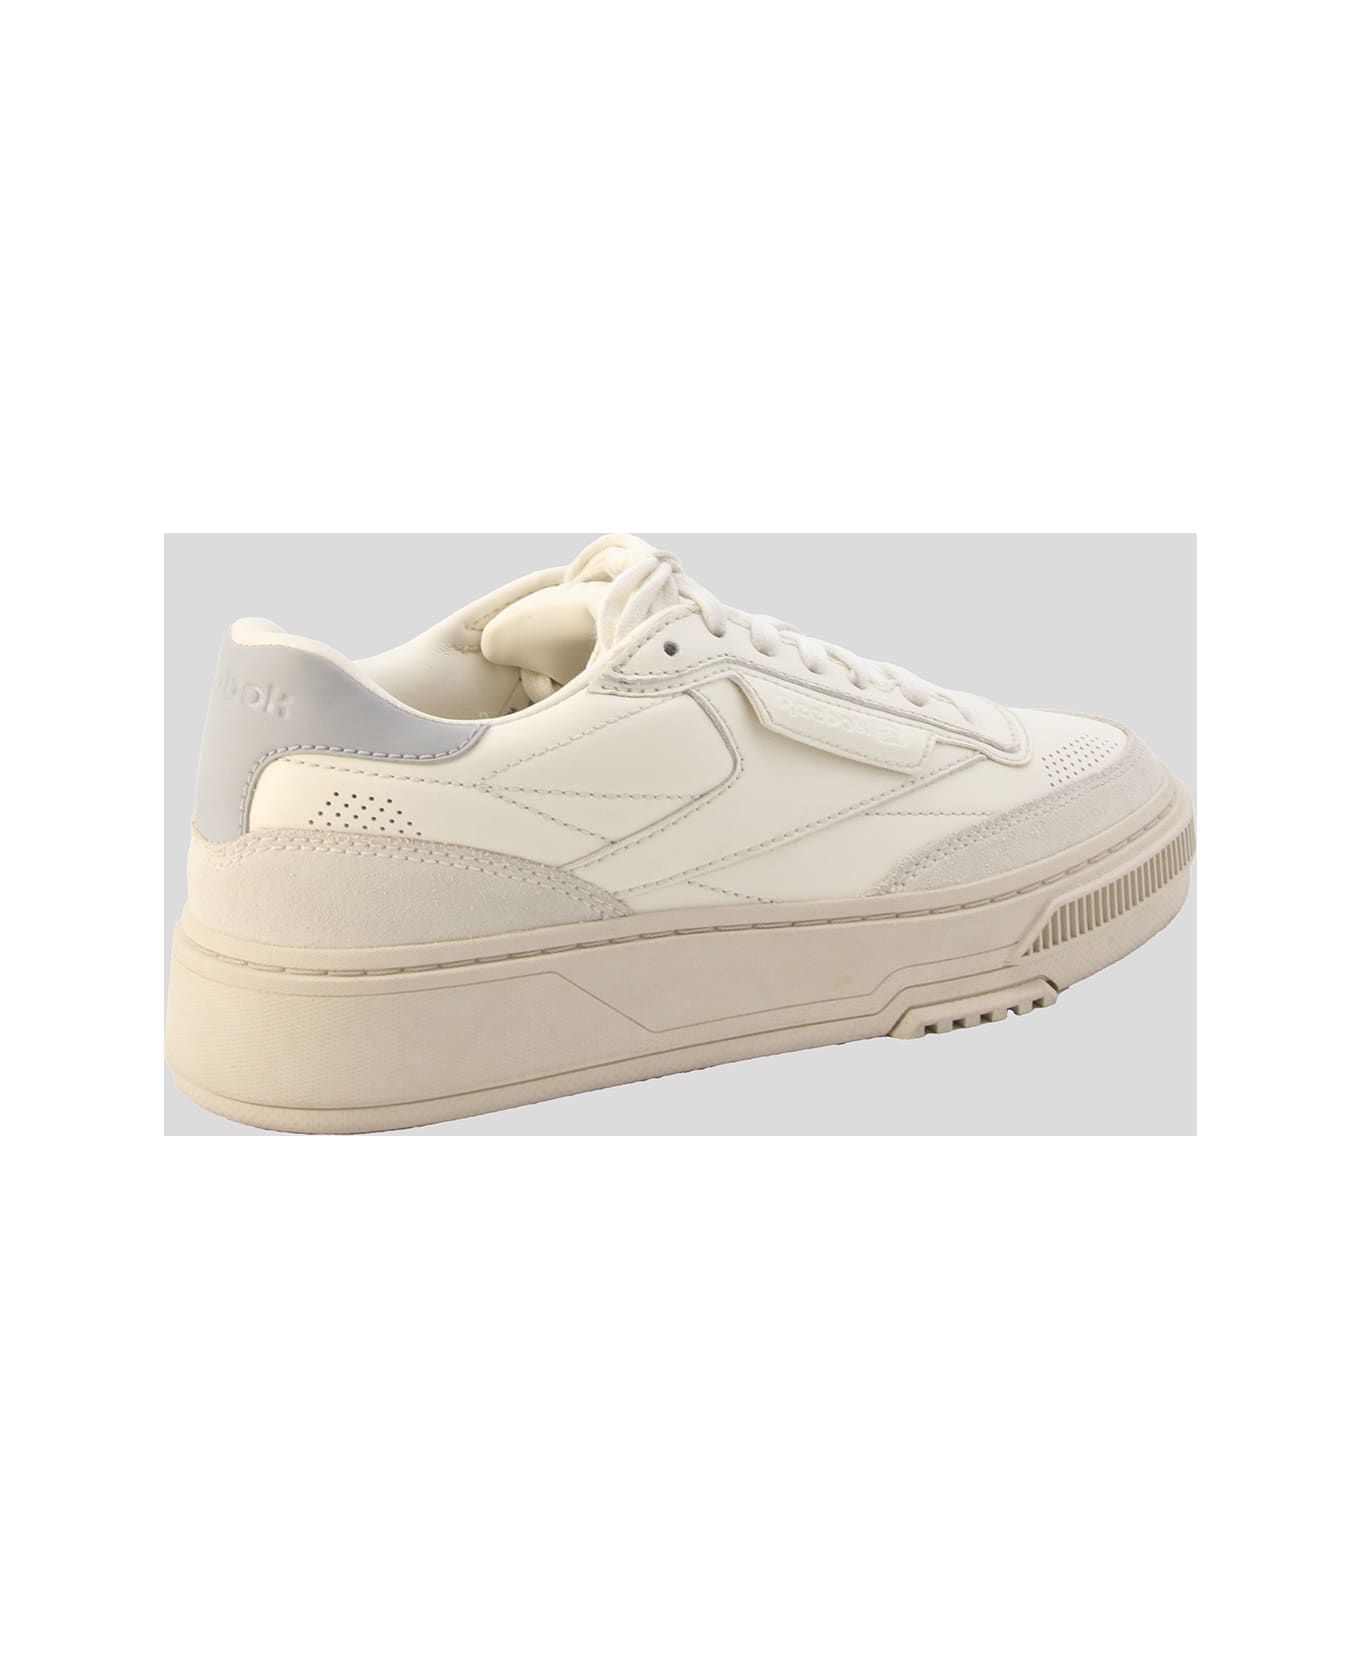 Reebok White And Grey Leather C Ltd Sneakers - White